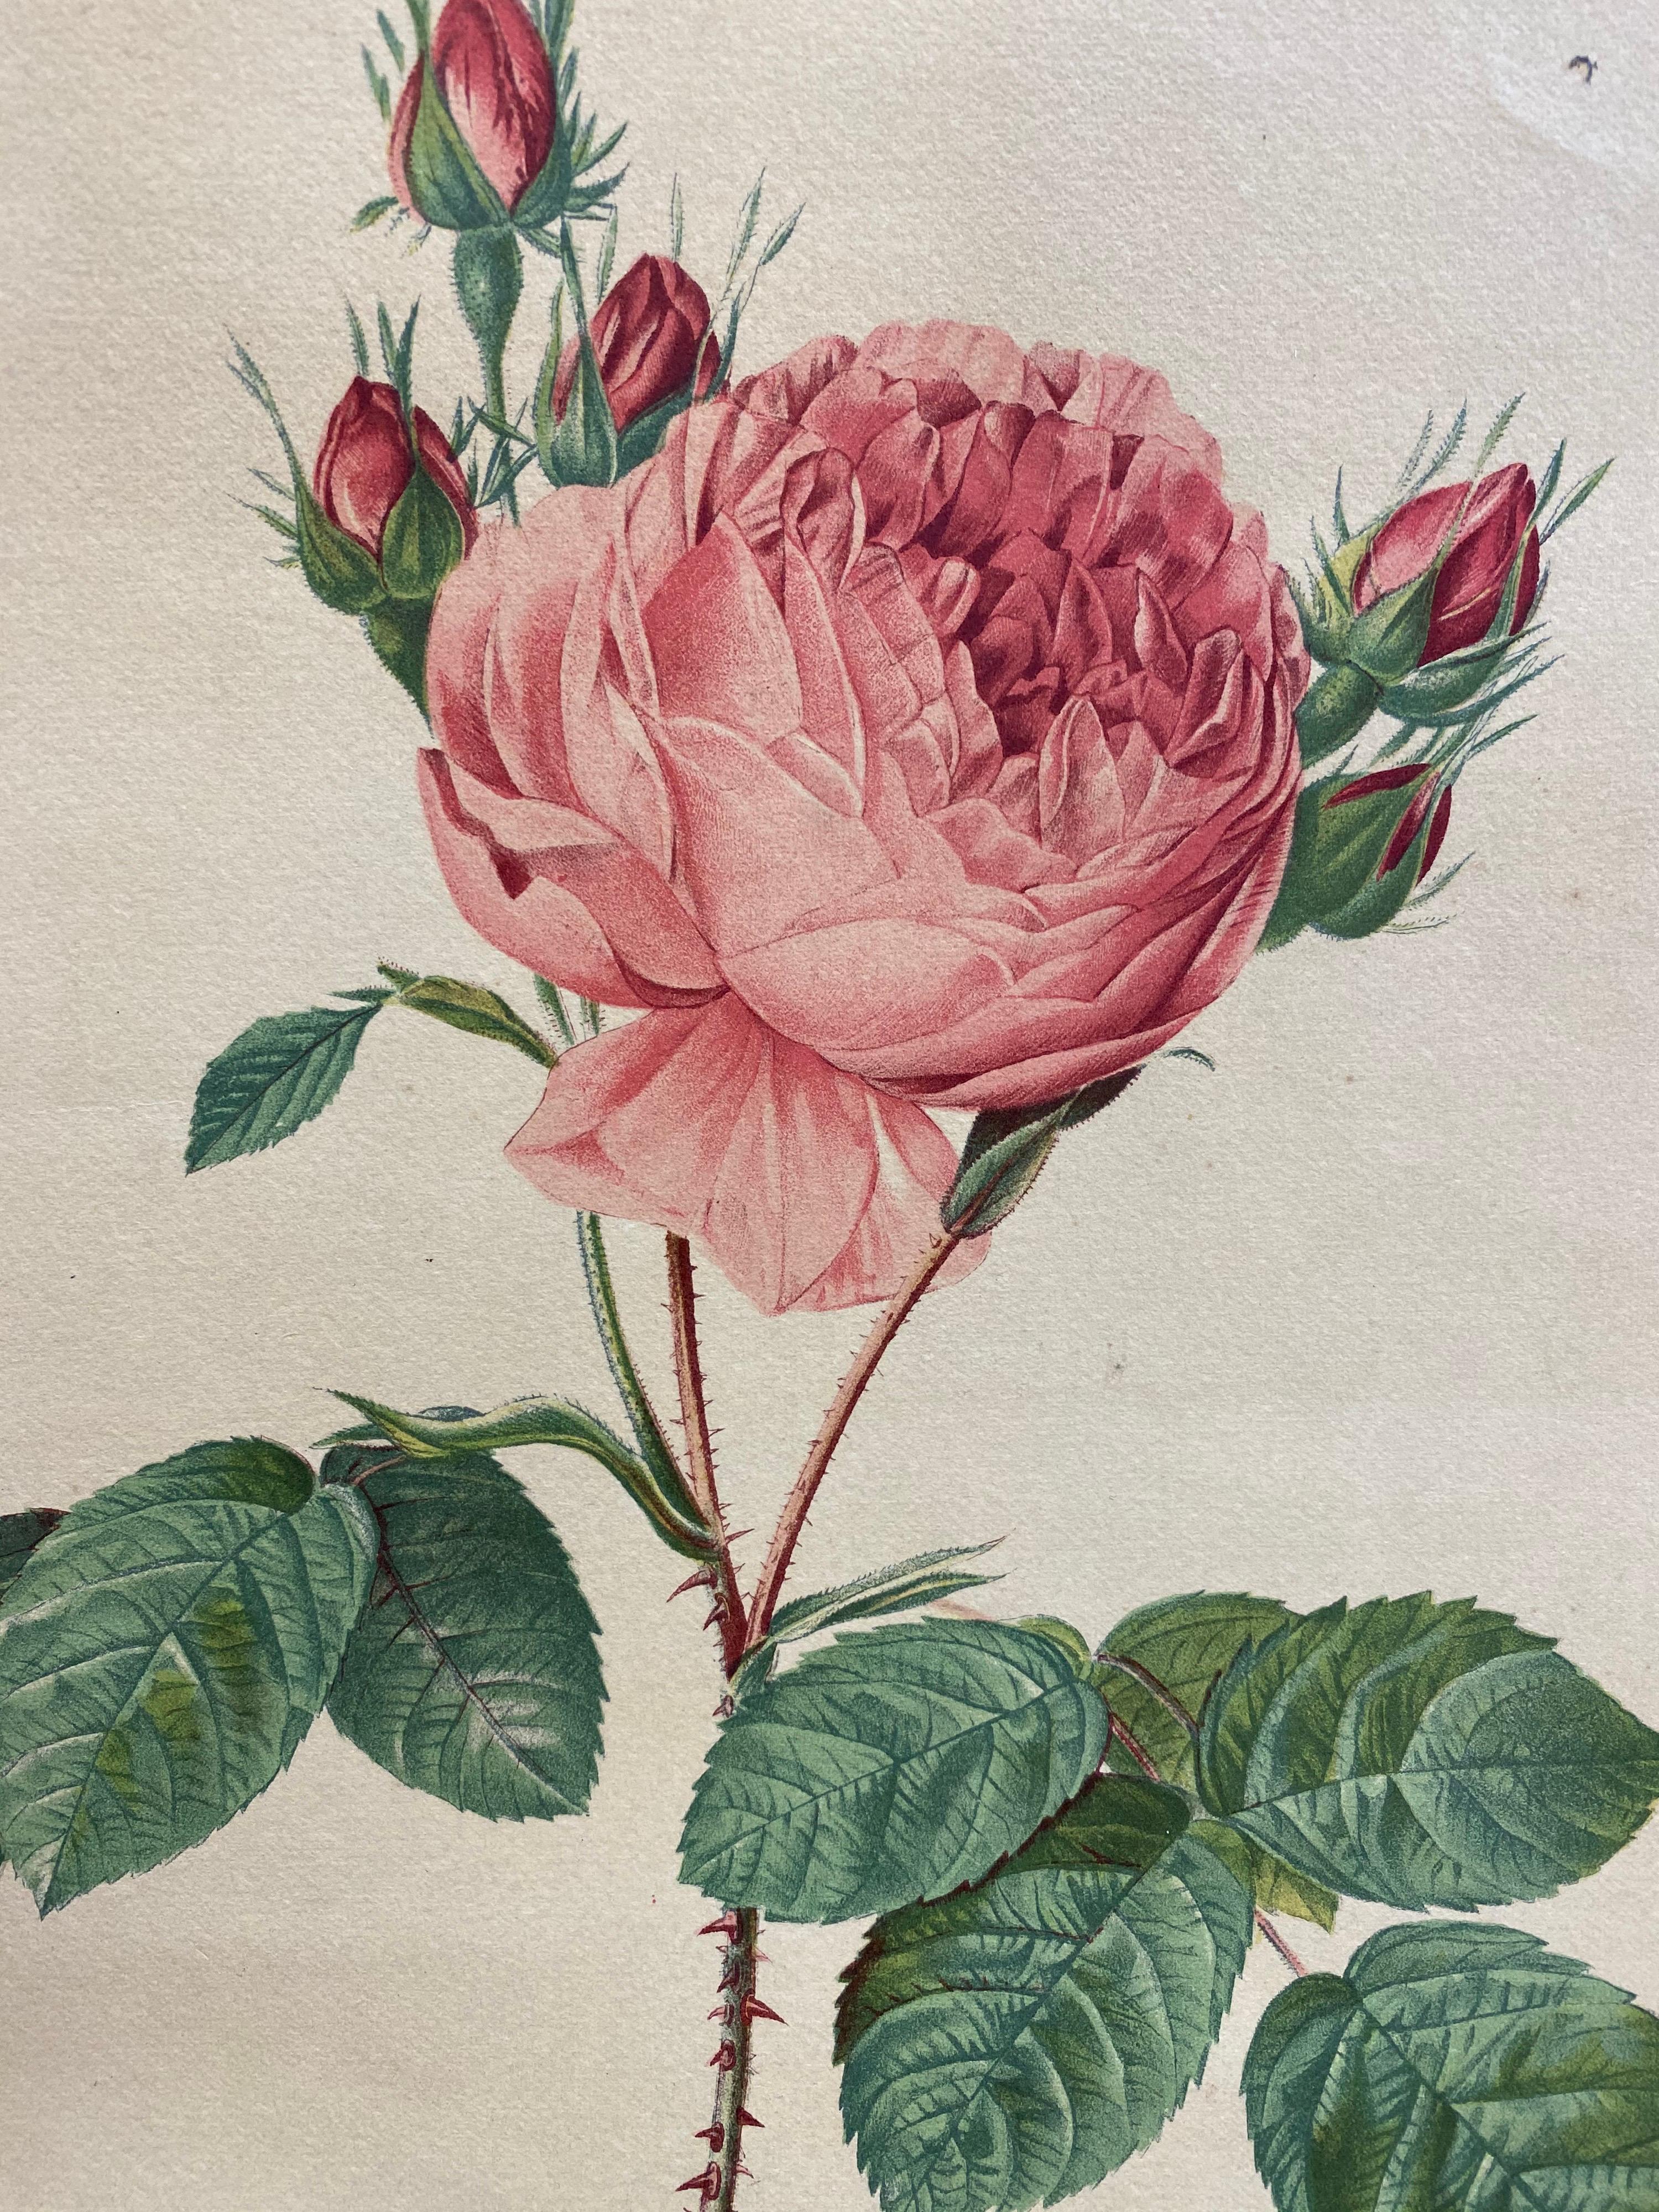 La Redoute
set of six French vintage color prints of roses
size: each print is 16 x 12.5 inches, unframed. 

Condition report: 
each print is in sound condition, minor age related staining and markings as the items are vintage. 